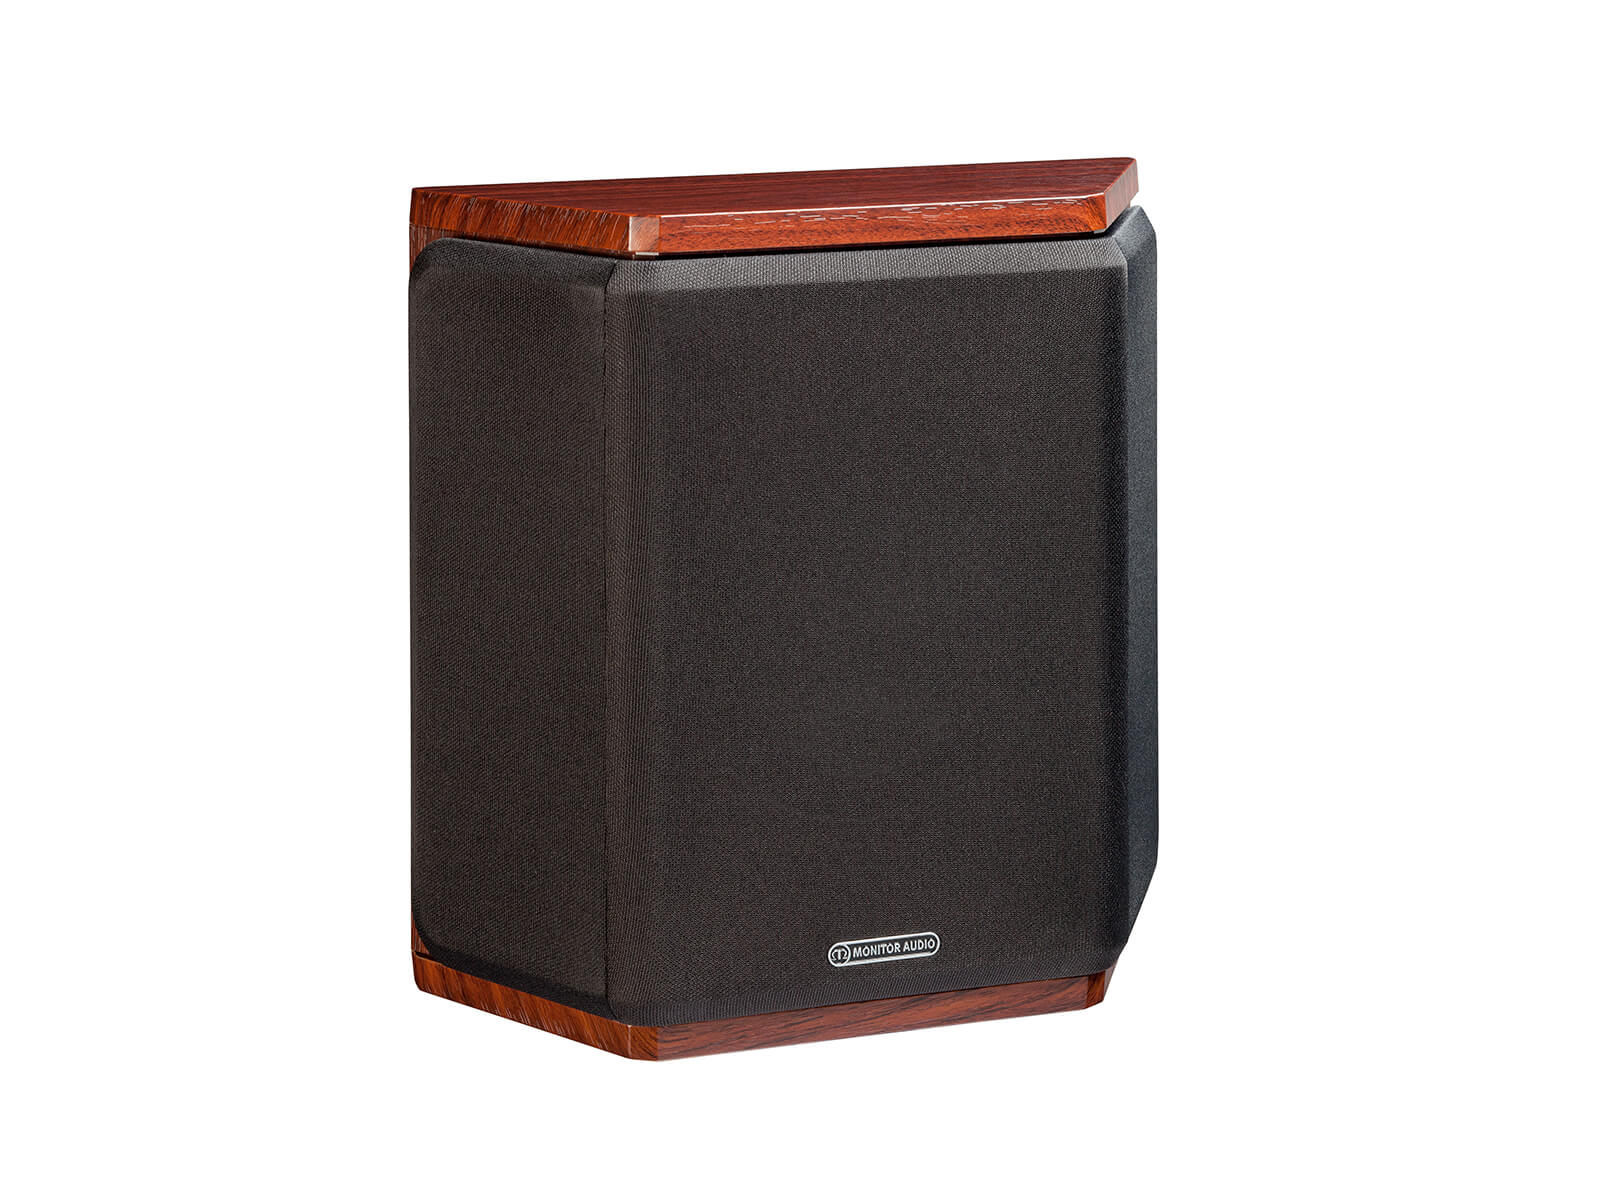 Bronze FX, surround speakers, featuring a grille and a rosemah vinyl finish.